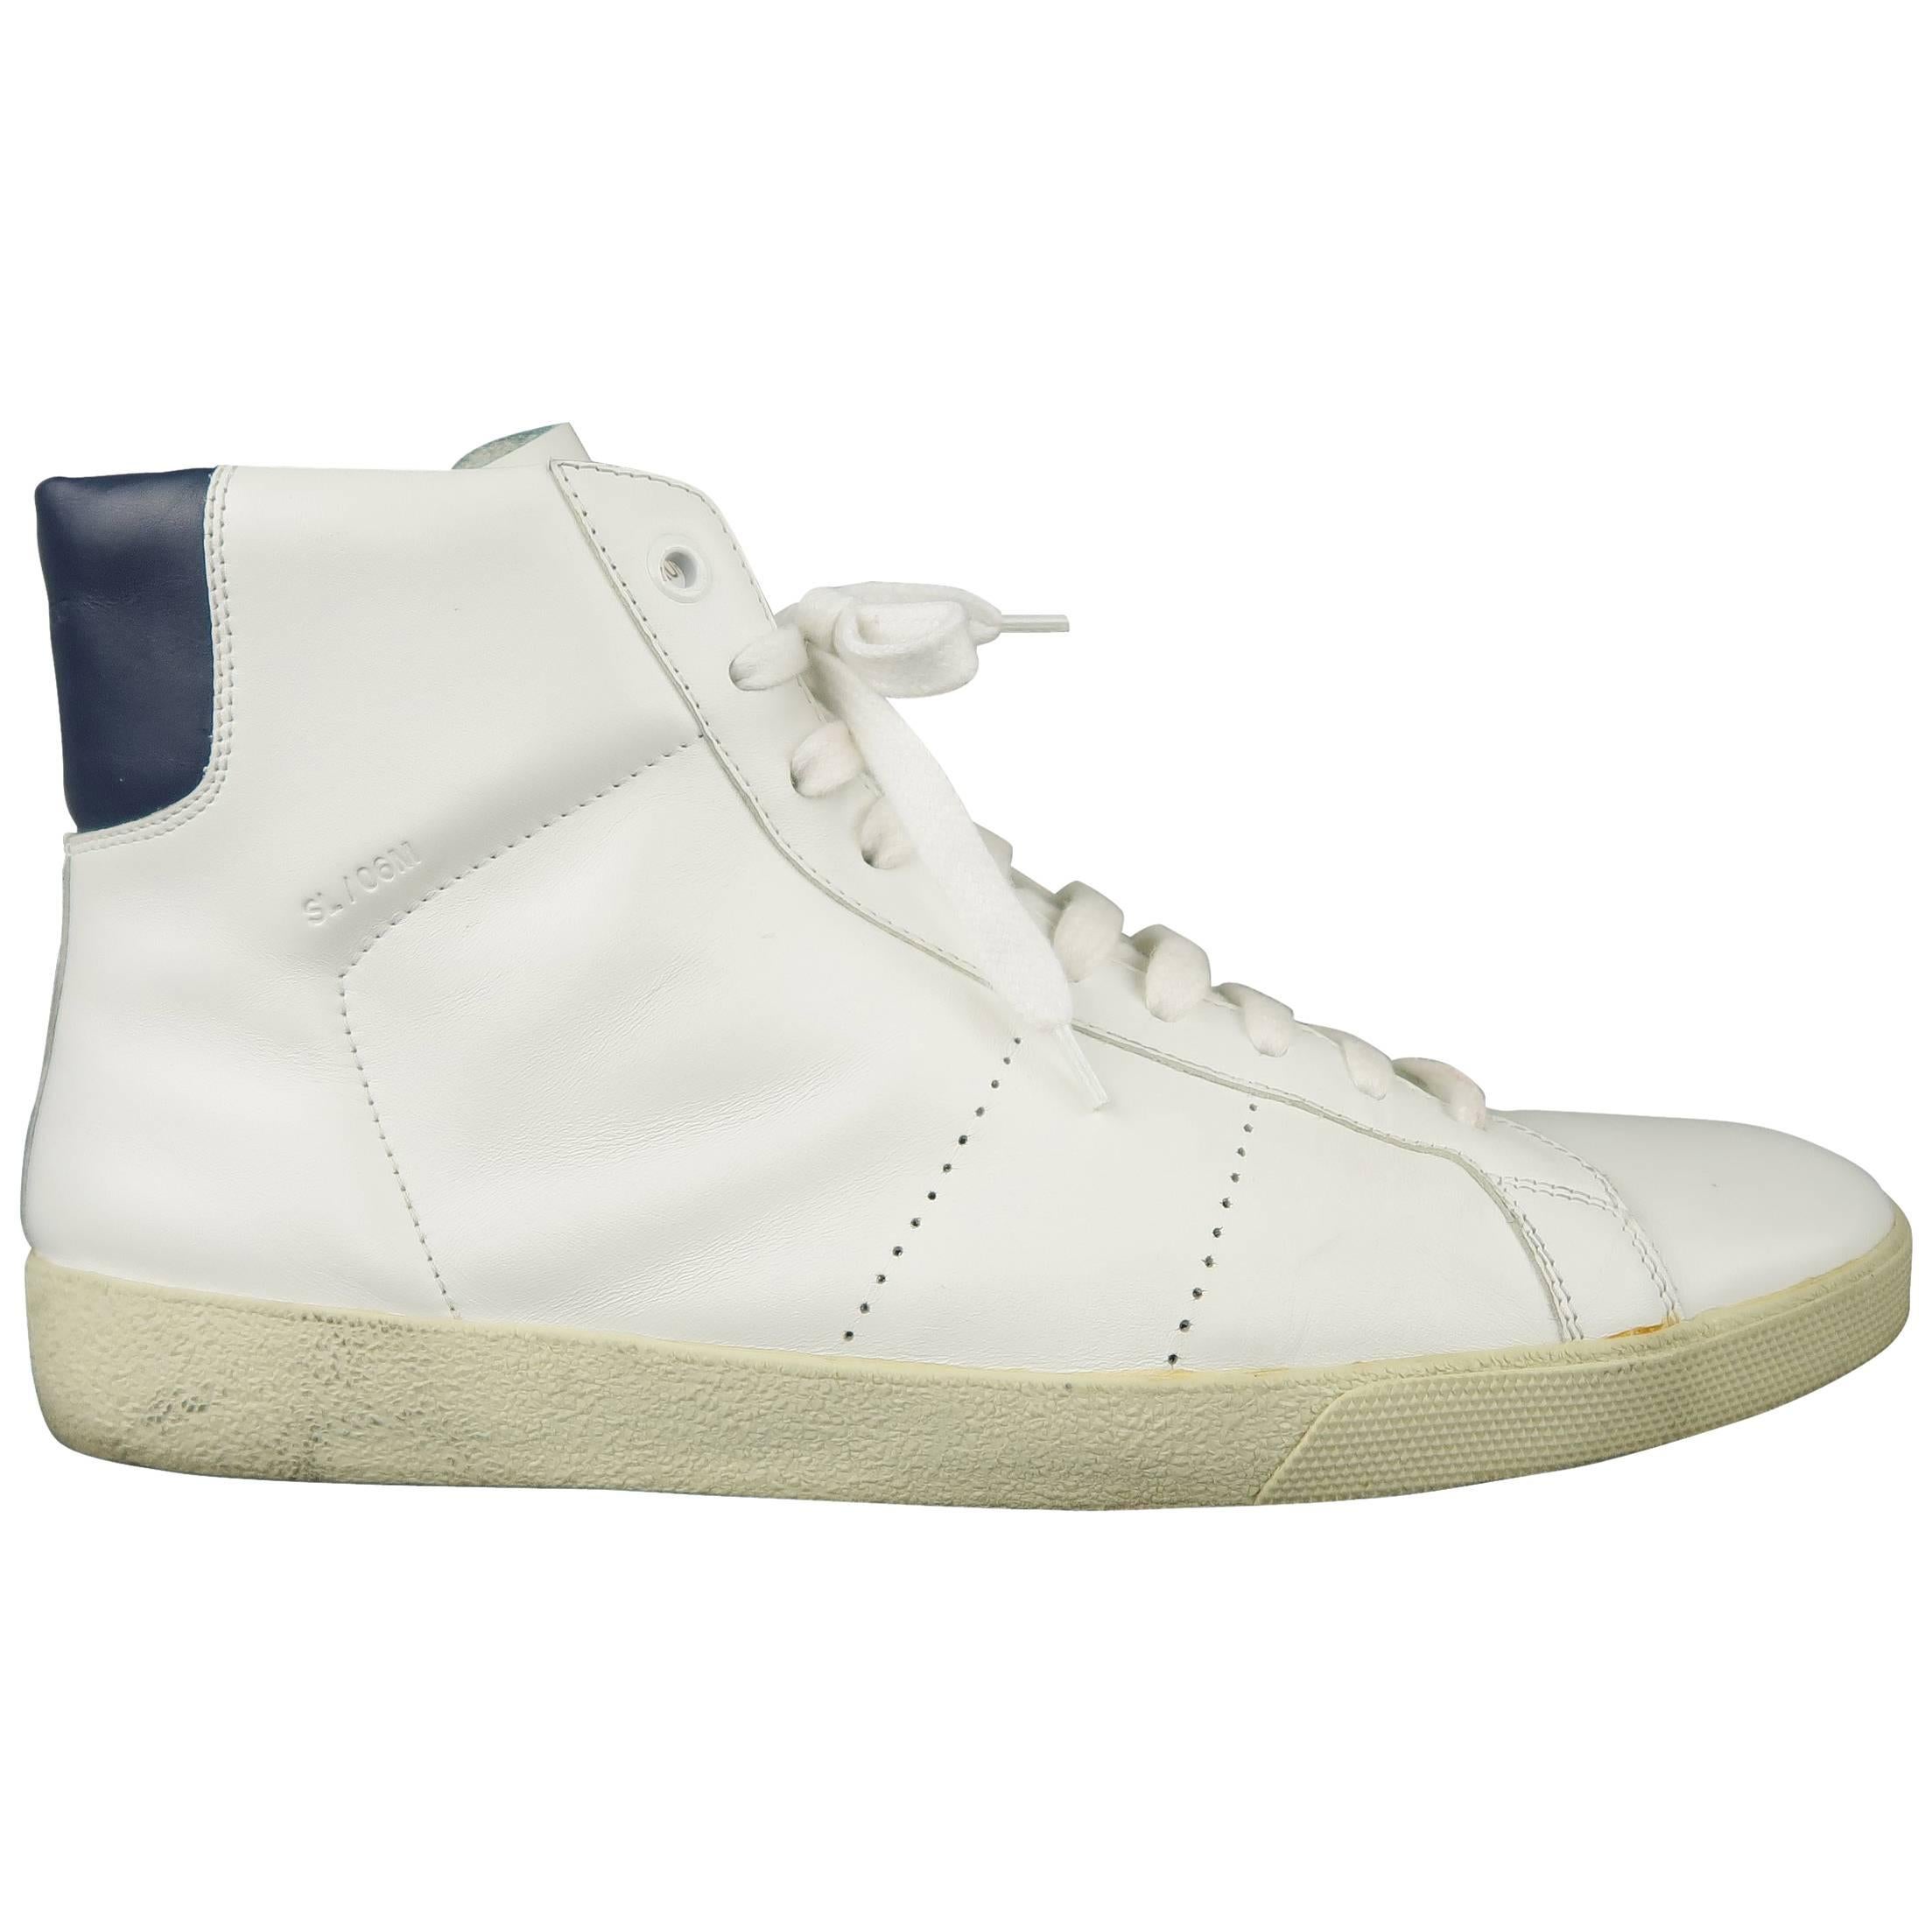 Men's SAINT LAURENT Size 10 White & Navy Leather SL/06 High Top Sneakers